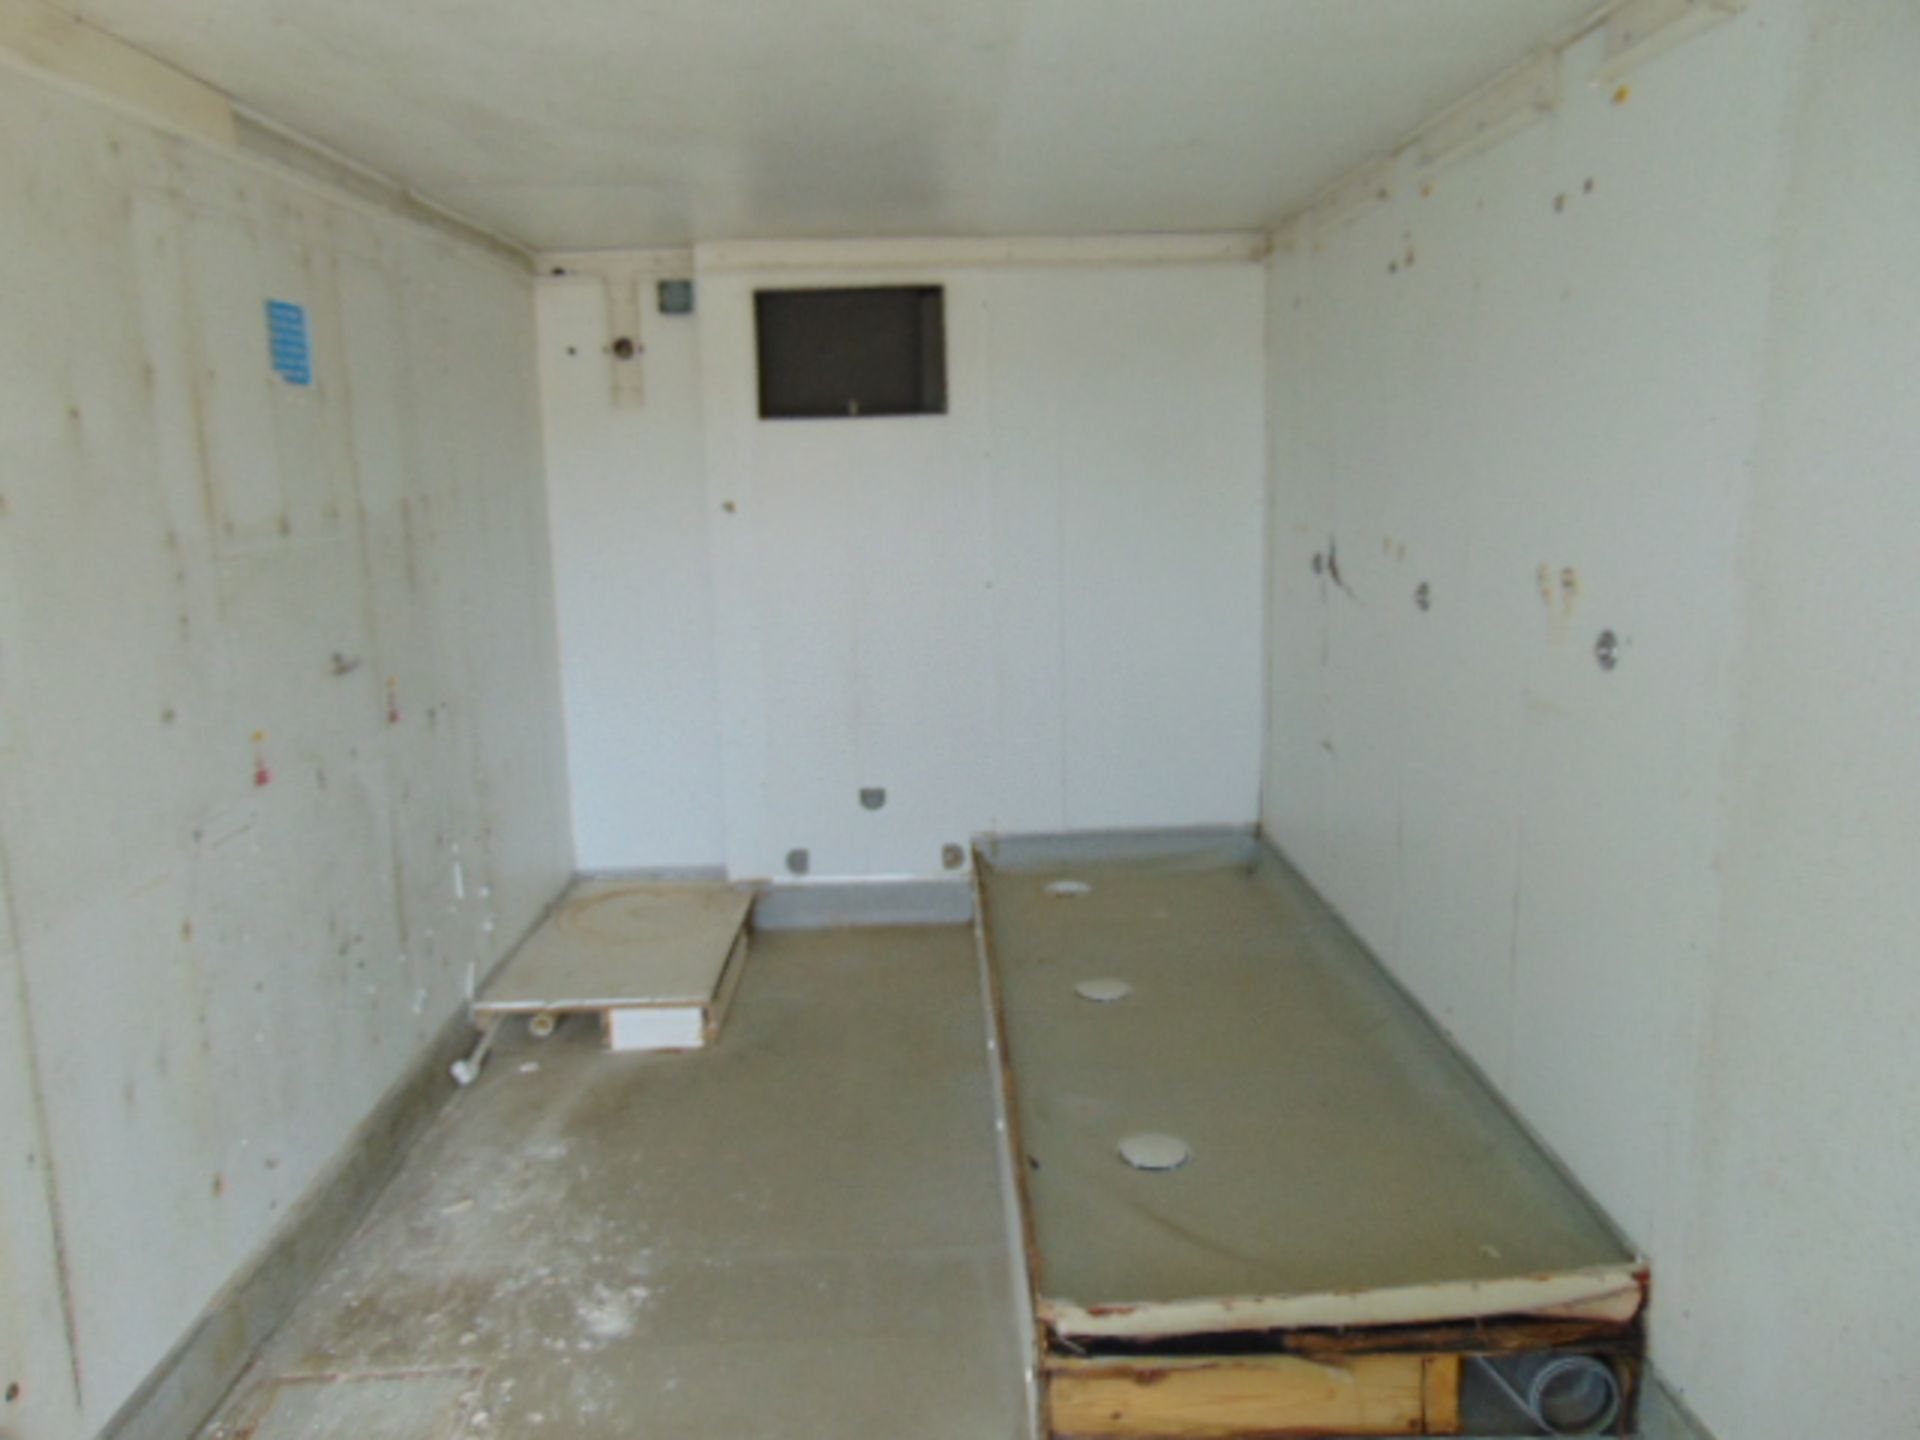 20ft Insulated ISO Container with fork handling positions, twist lock castings etc - Image 13 of 15